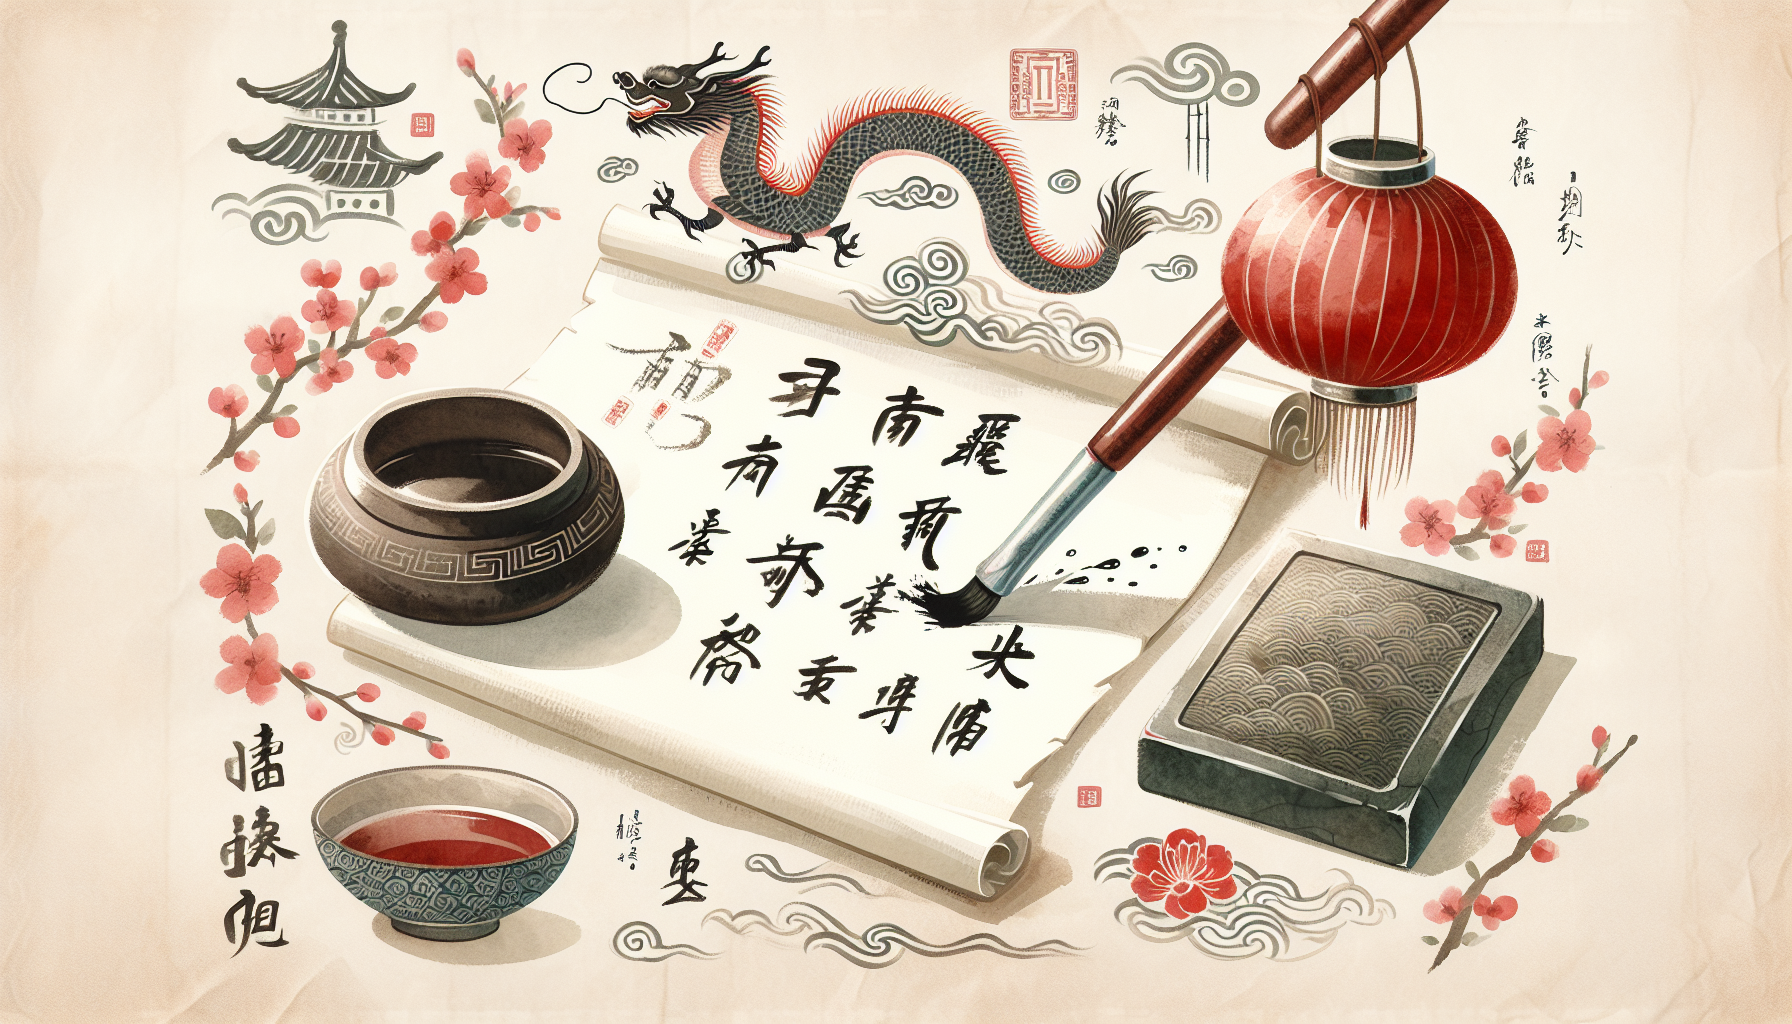 Chinese culture and language